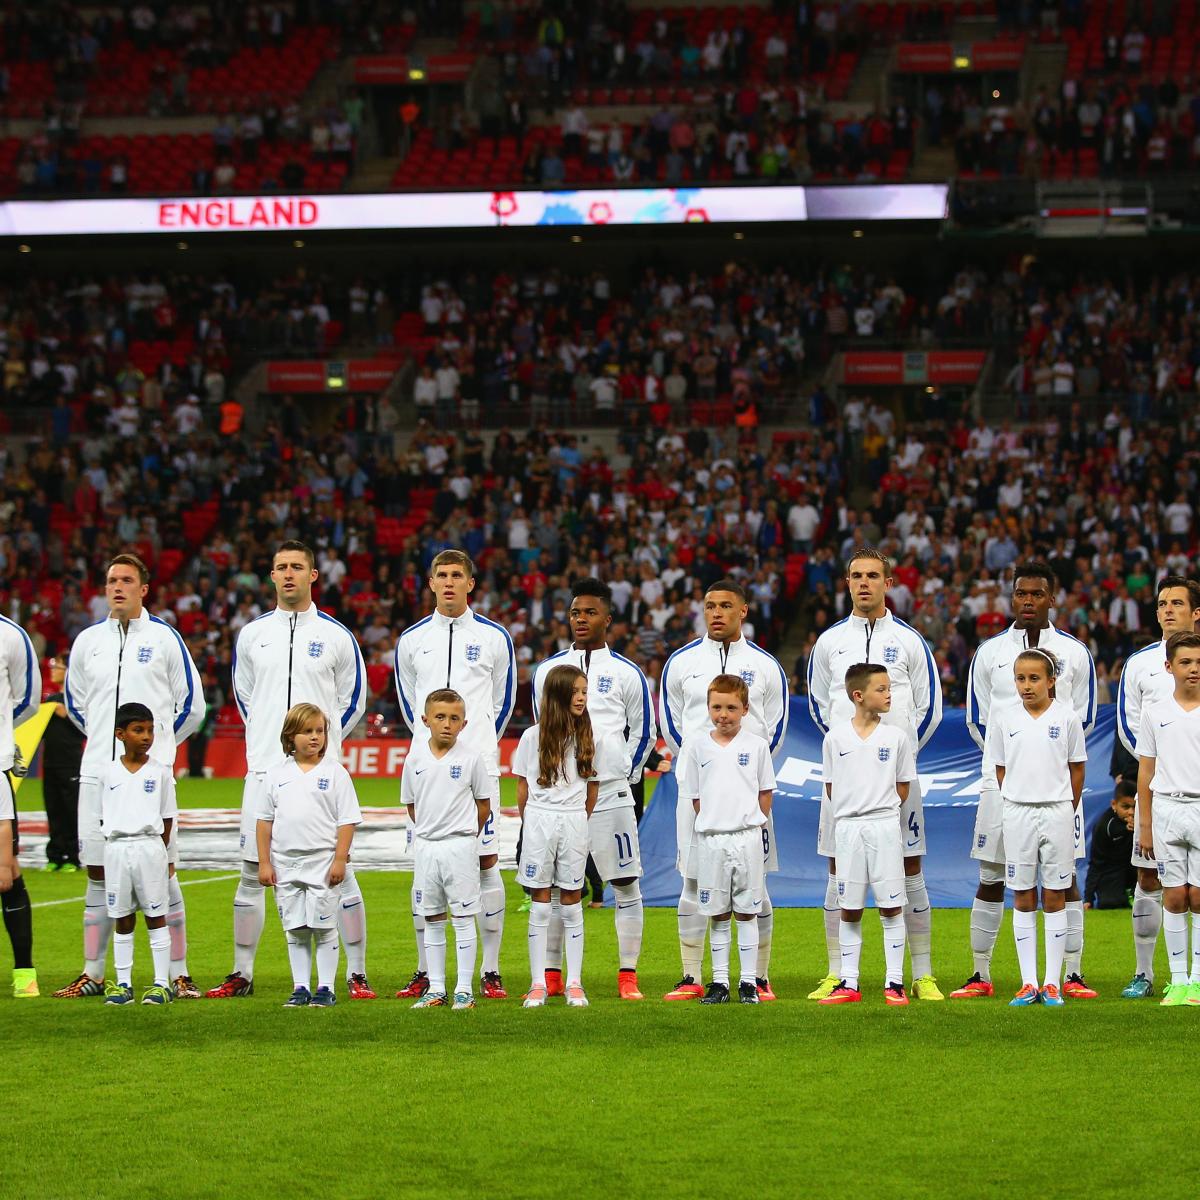 England vs. San Marino: Date, Time, Live Stream, TV Info and Preview